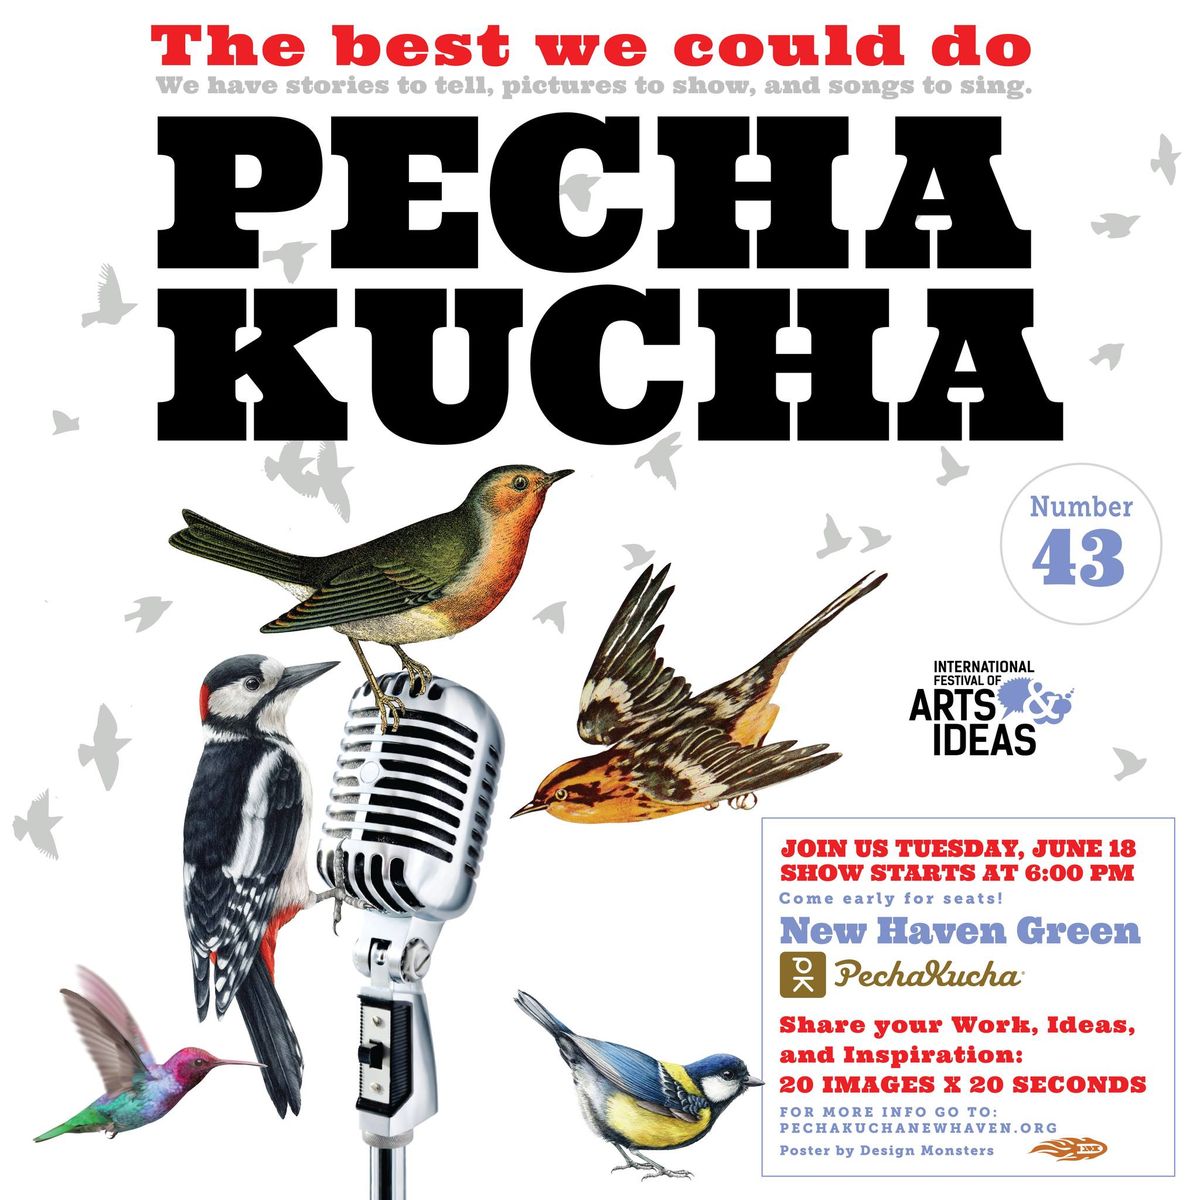 PechaKucha New Haven: The 'Best We Could Do' Edition